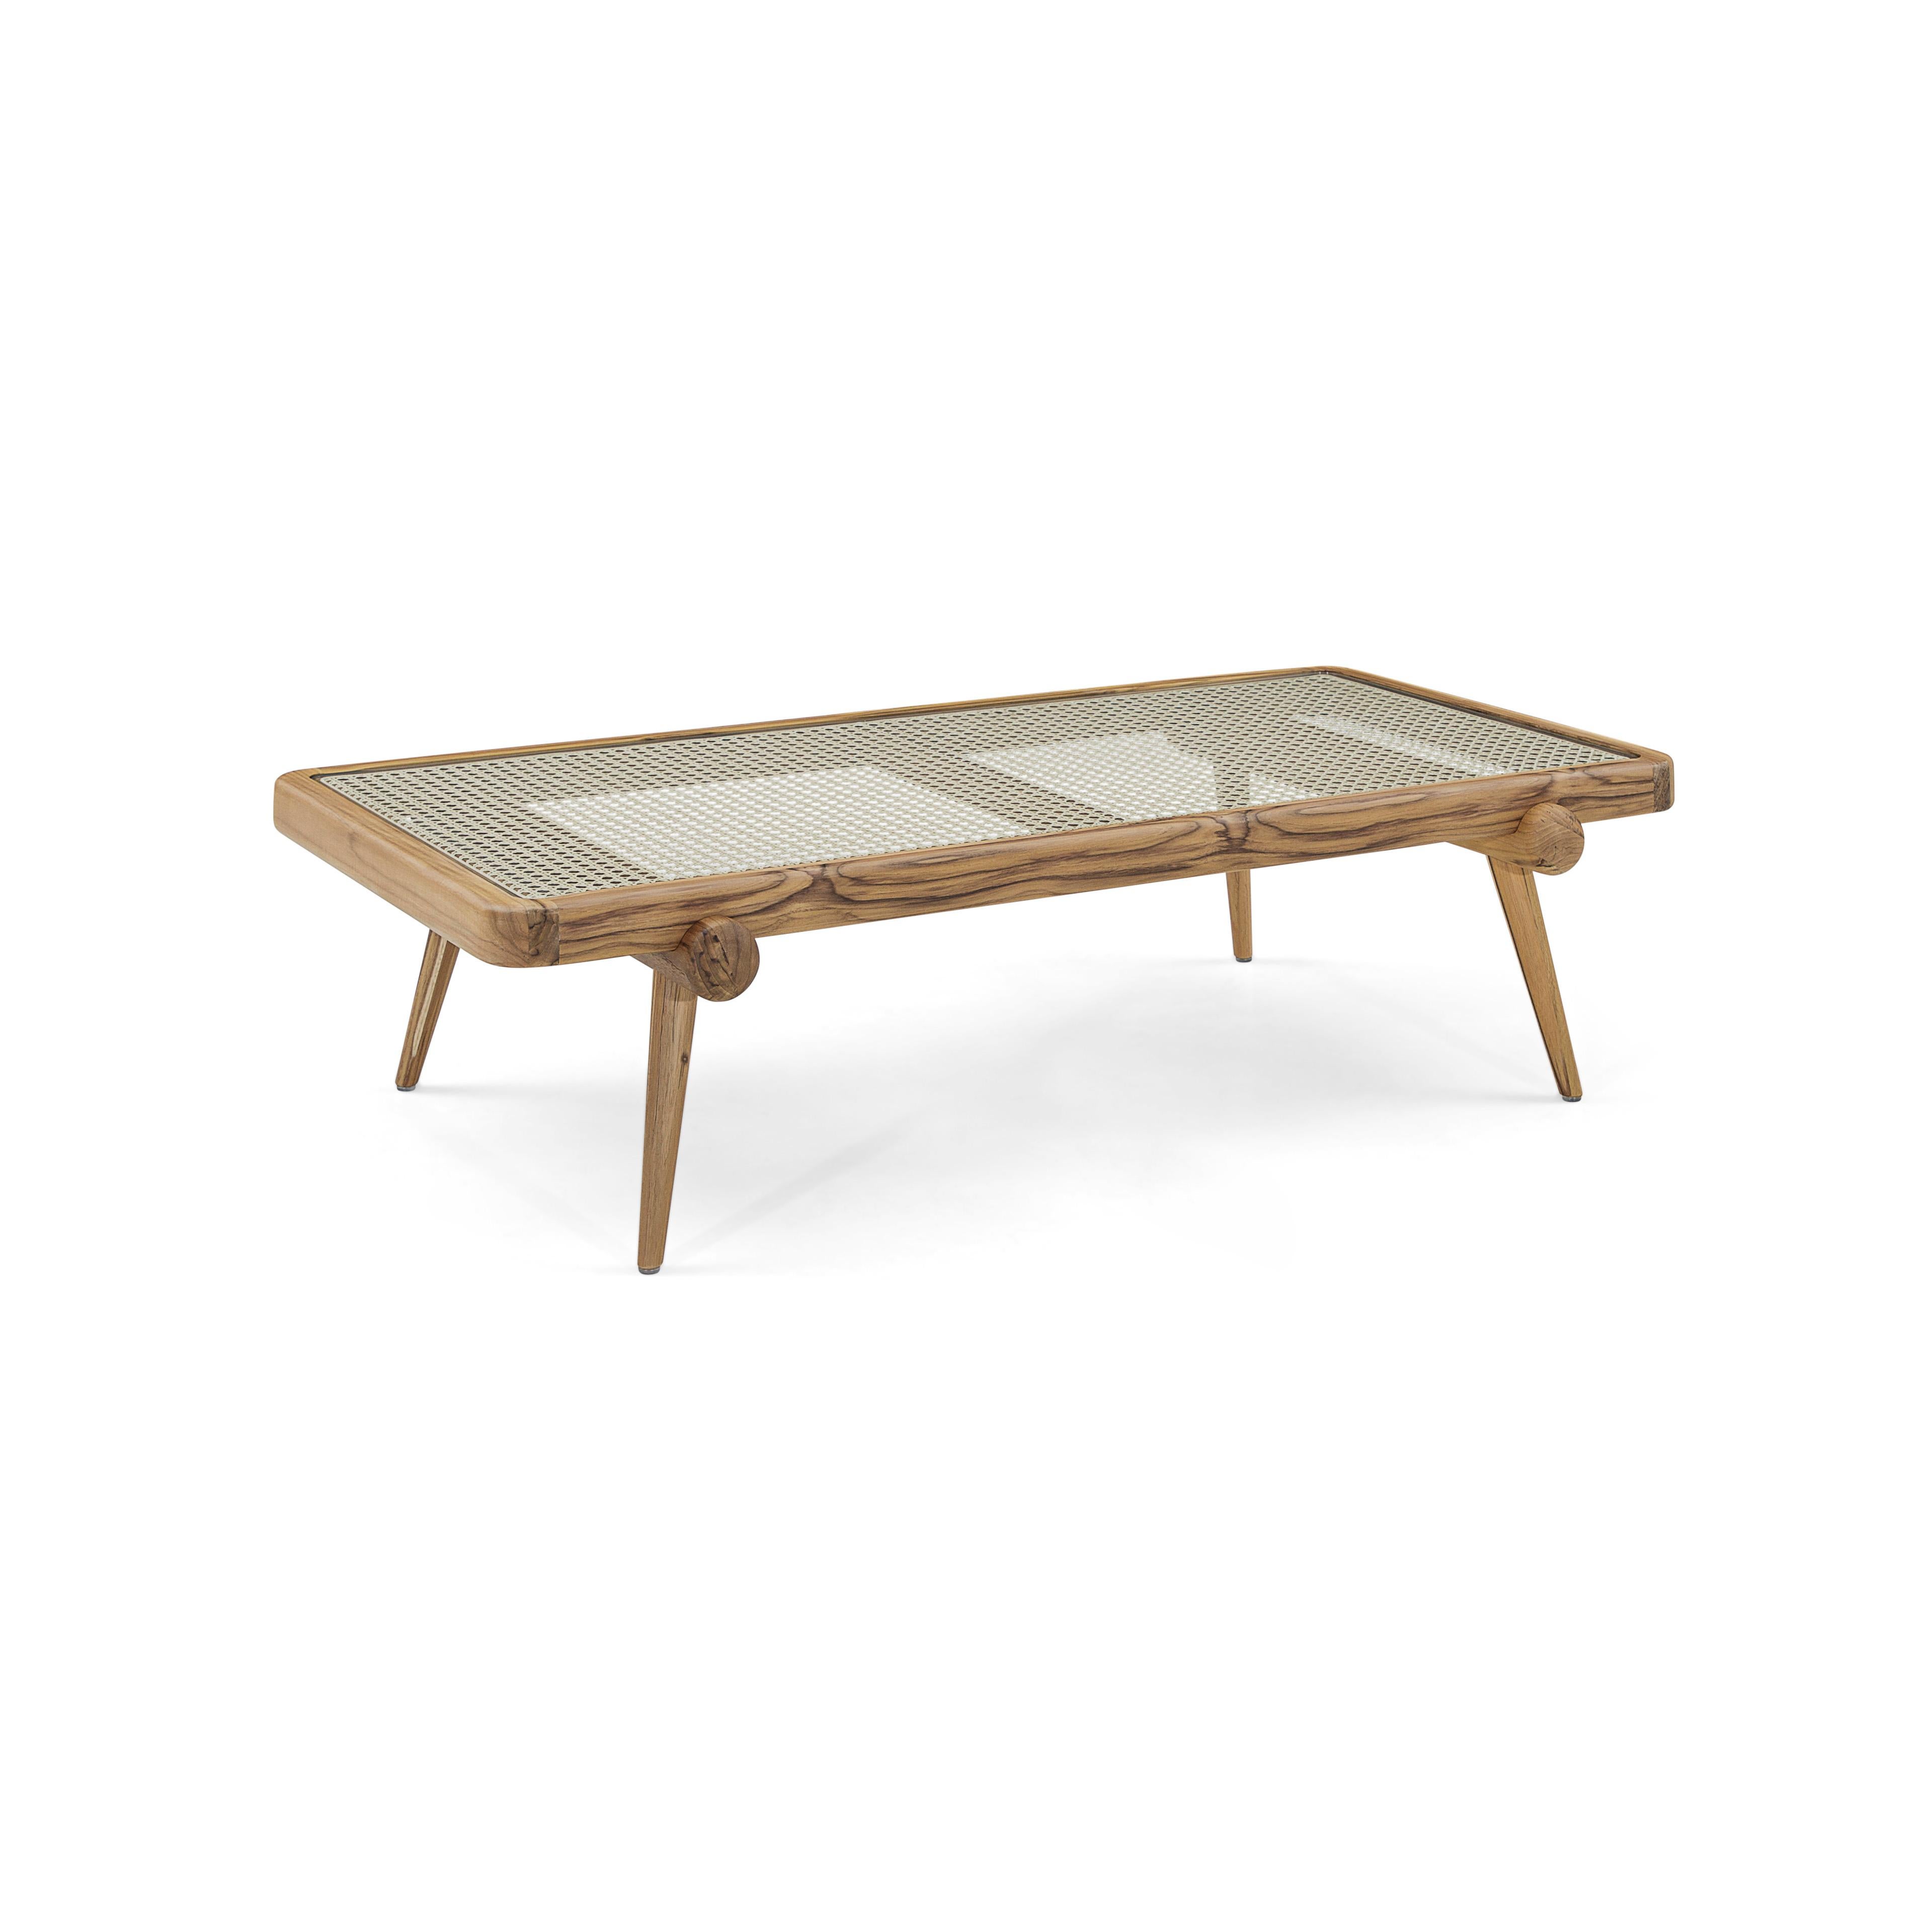 Brazilian Plot Coffee Table in Teak Wood Finish with Cane Under a Tempered Glass Top For Sale